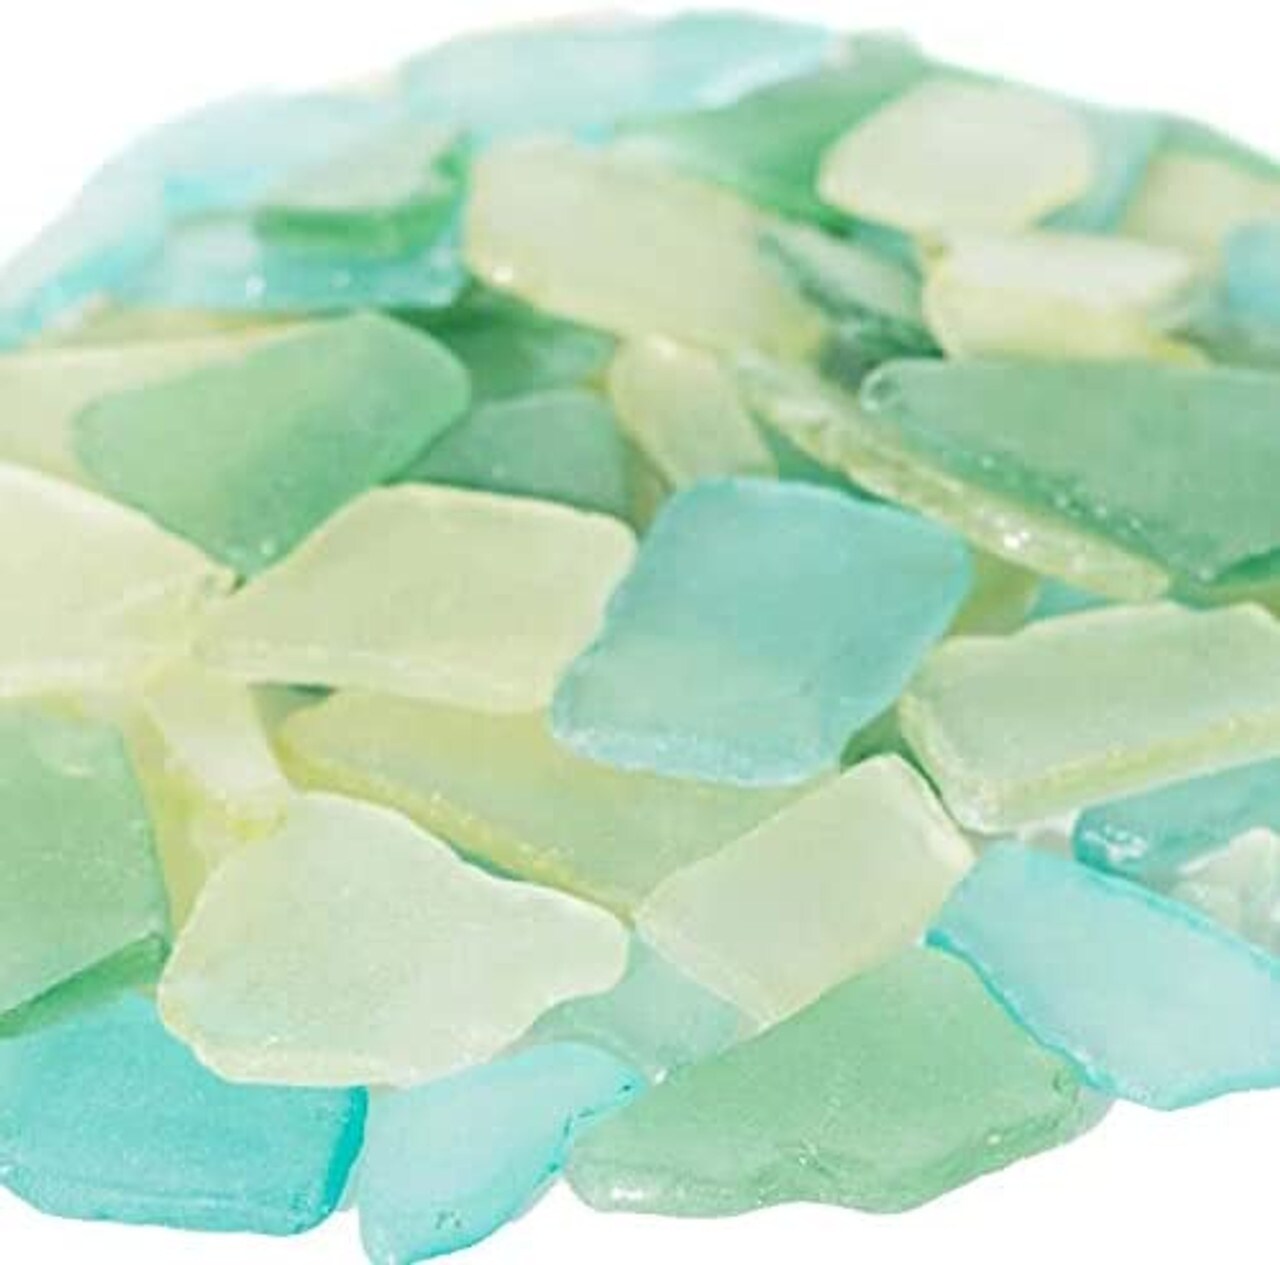  Sea Glass Pieces for Crafts, Weddings & Home Decor - Frosted  Flat Glass in Blue, White & Green (11 Oz) : Home & Kitchen